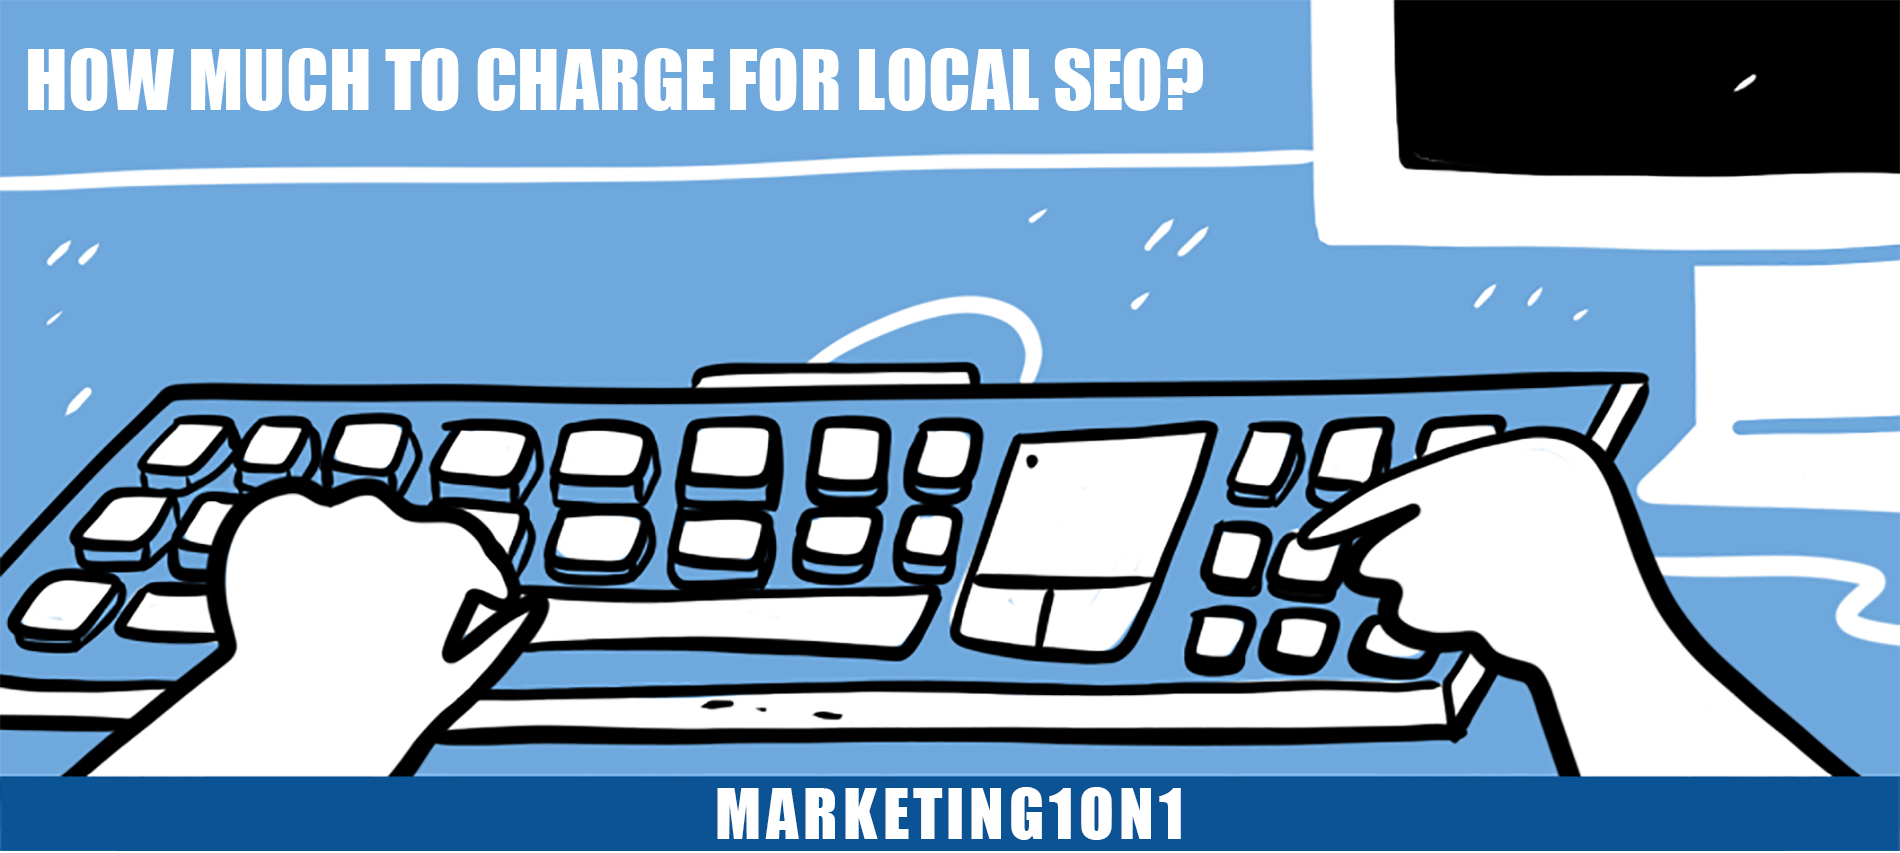 How much to charge for local SEO?